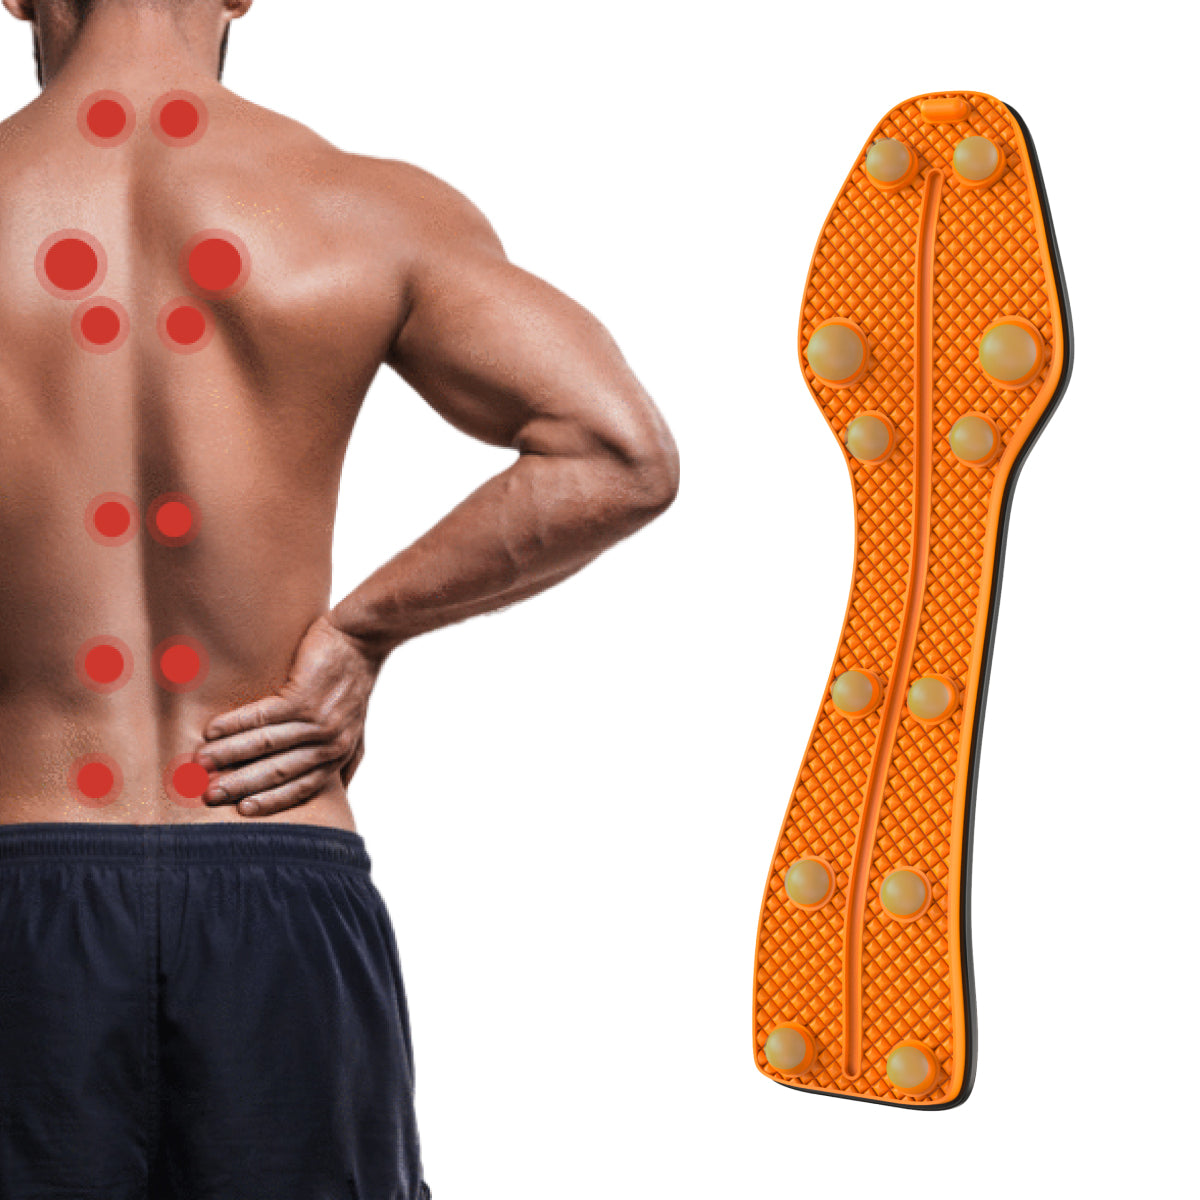 Trigger Point Rocker, showcasing its variety of pressure points.